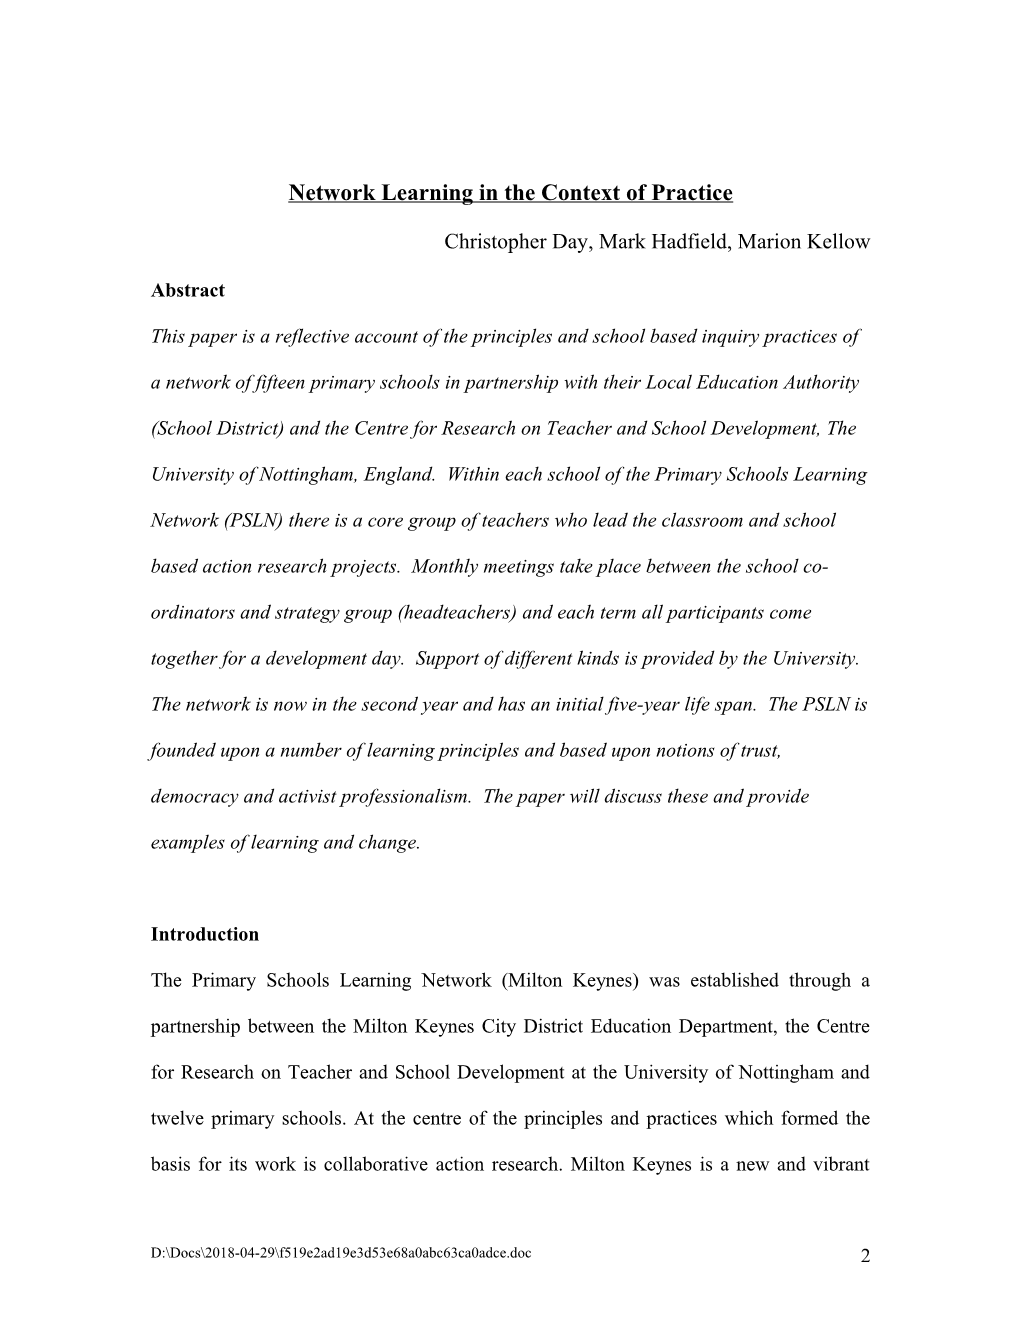 Partnerships, Teacher Professionalism and Network Learning: a Matter of Trust